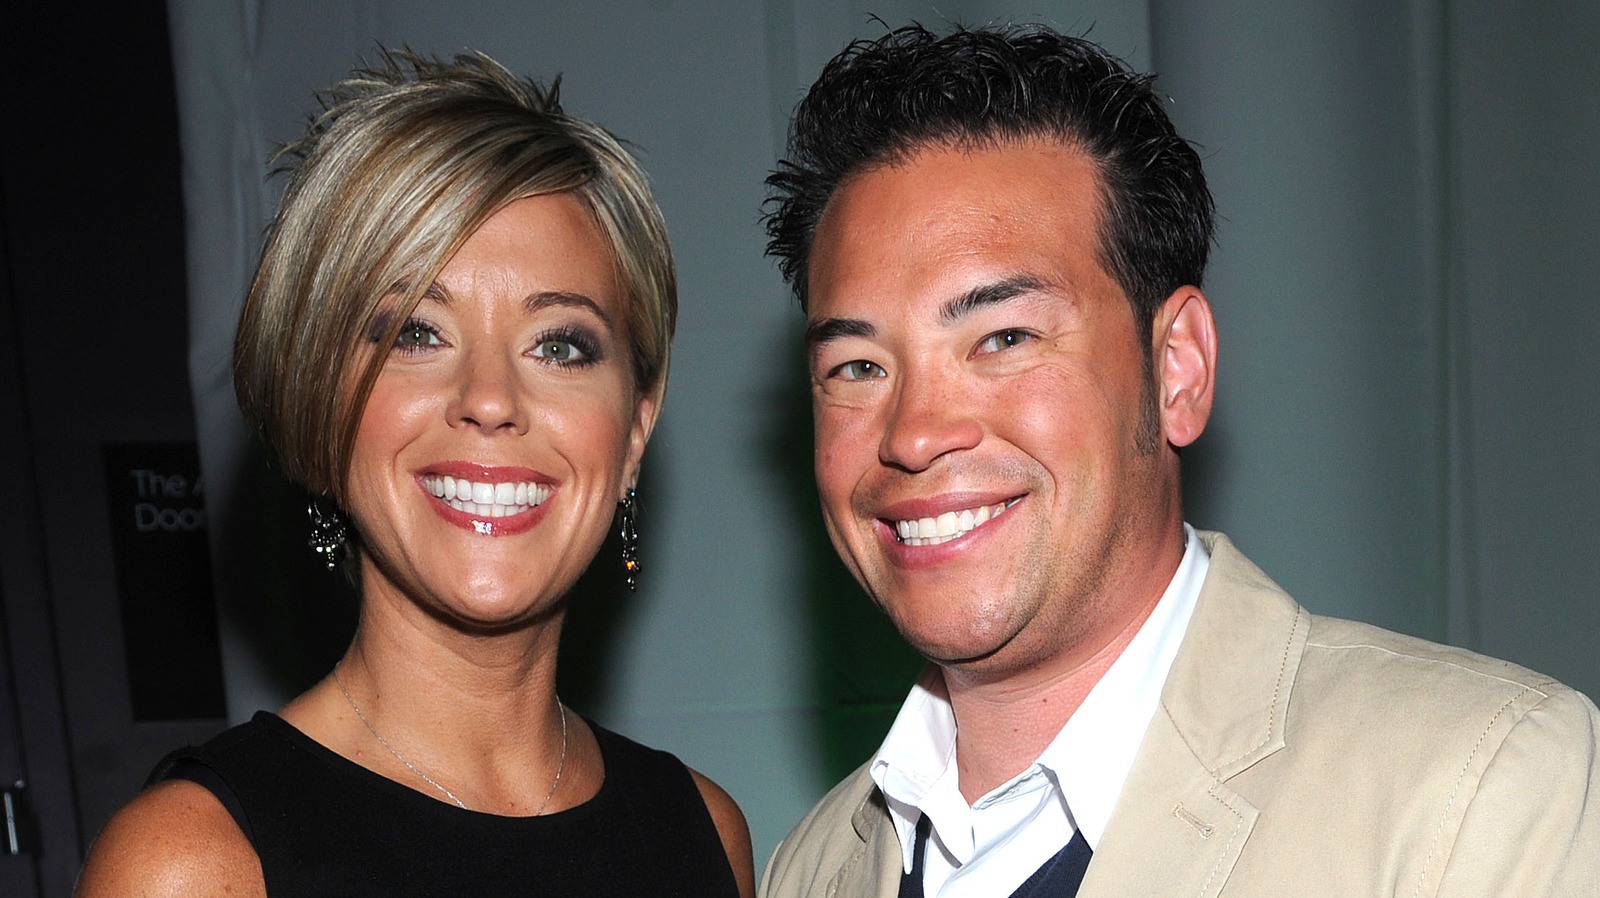 where jon and kate gosselin stand today years after their messy divorce